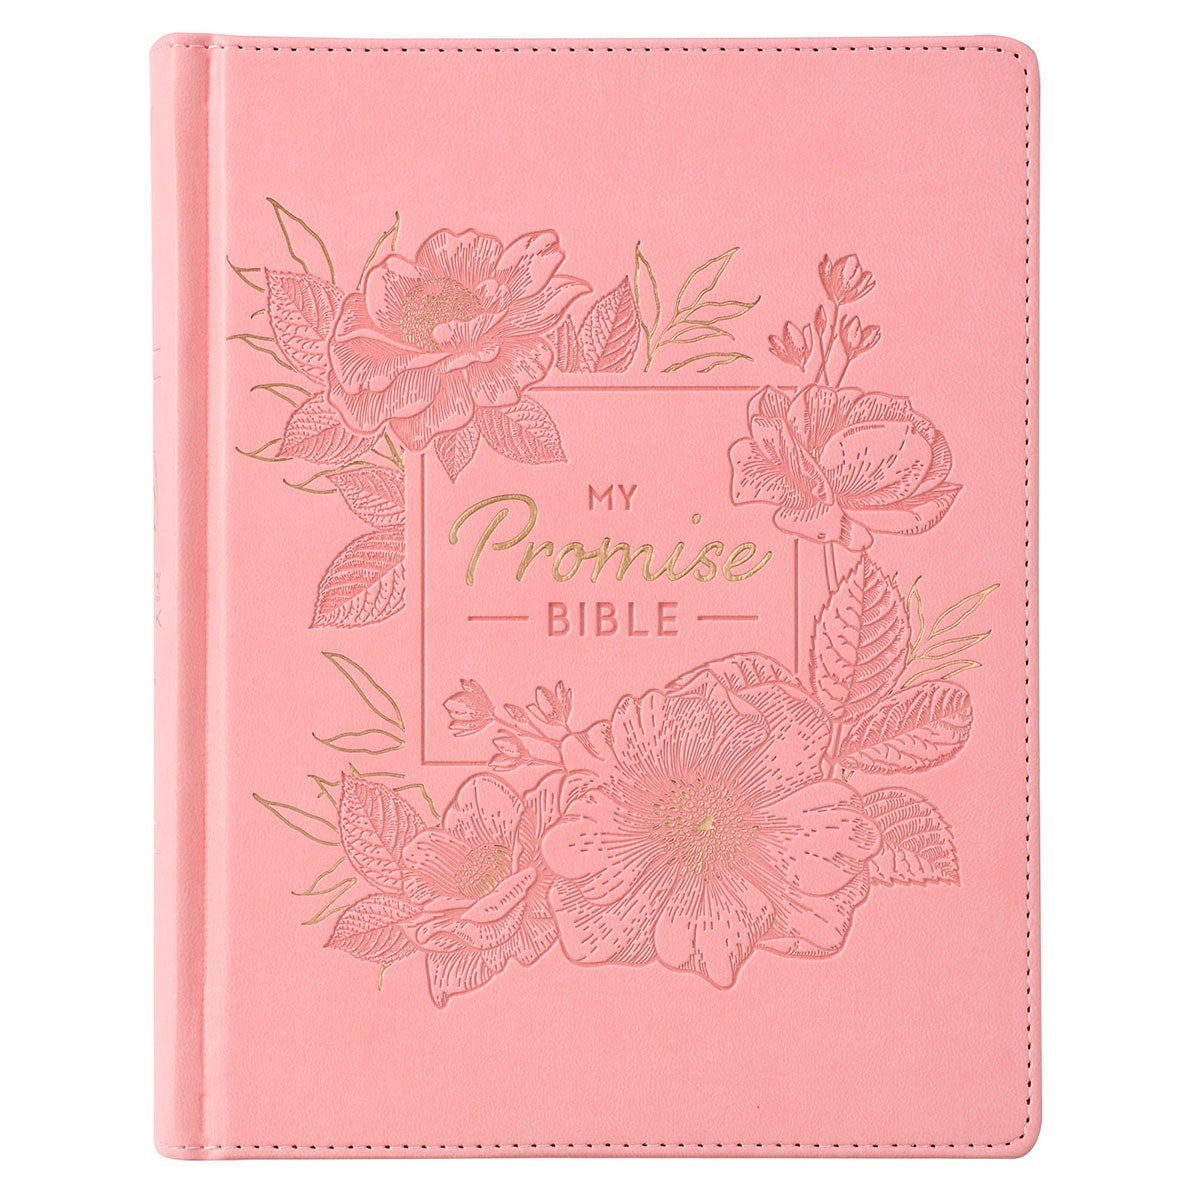 Seed of Abraham Christian Bookstore - (In)Courage - KJV My Promise Bible-Pink Square LuxLeather Hardcover